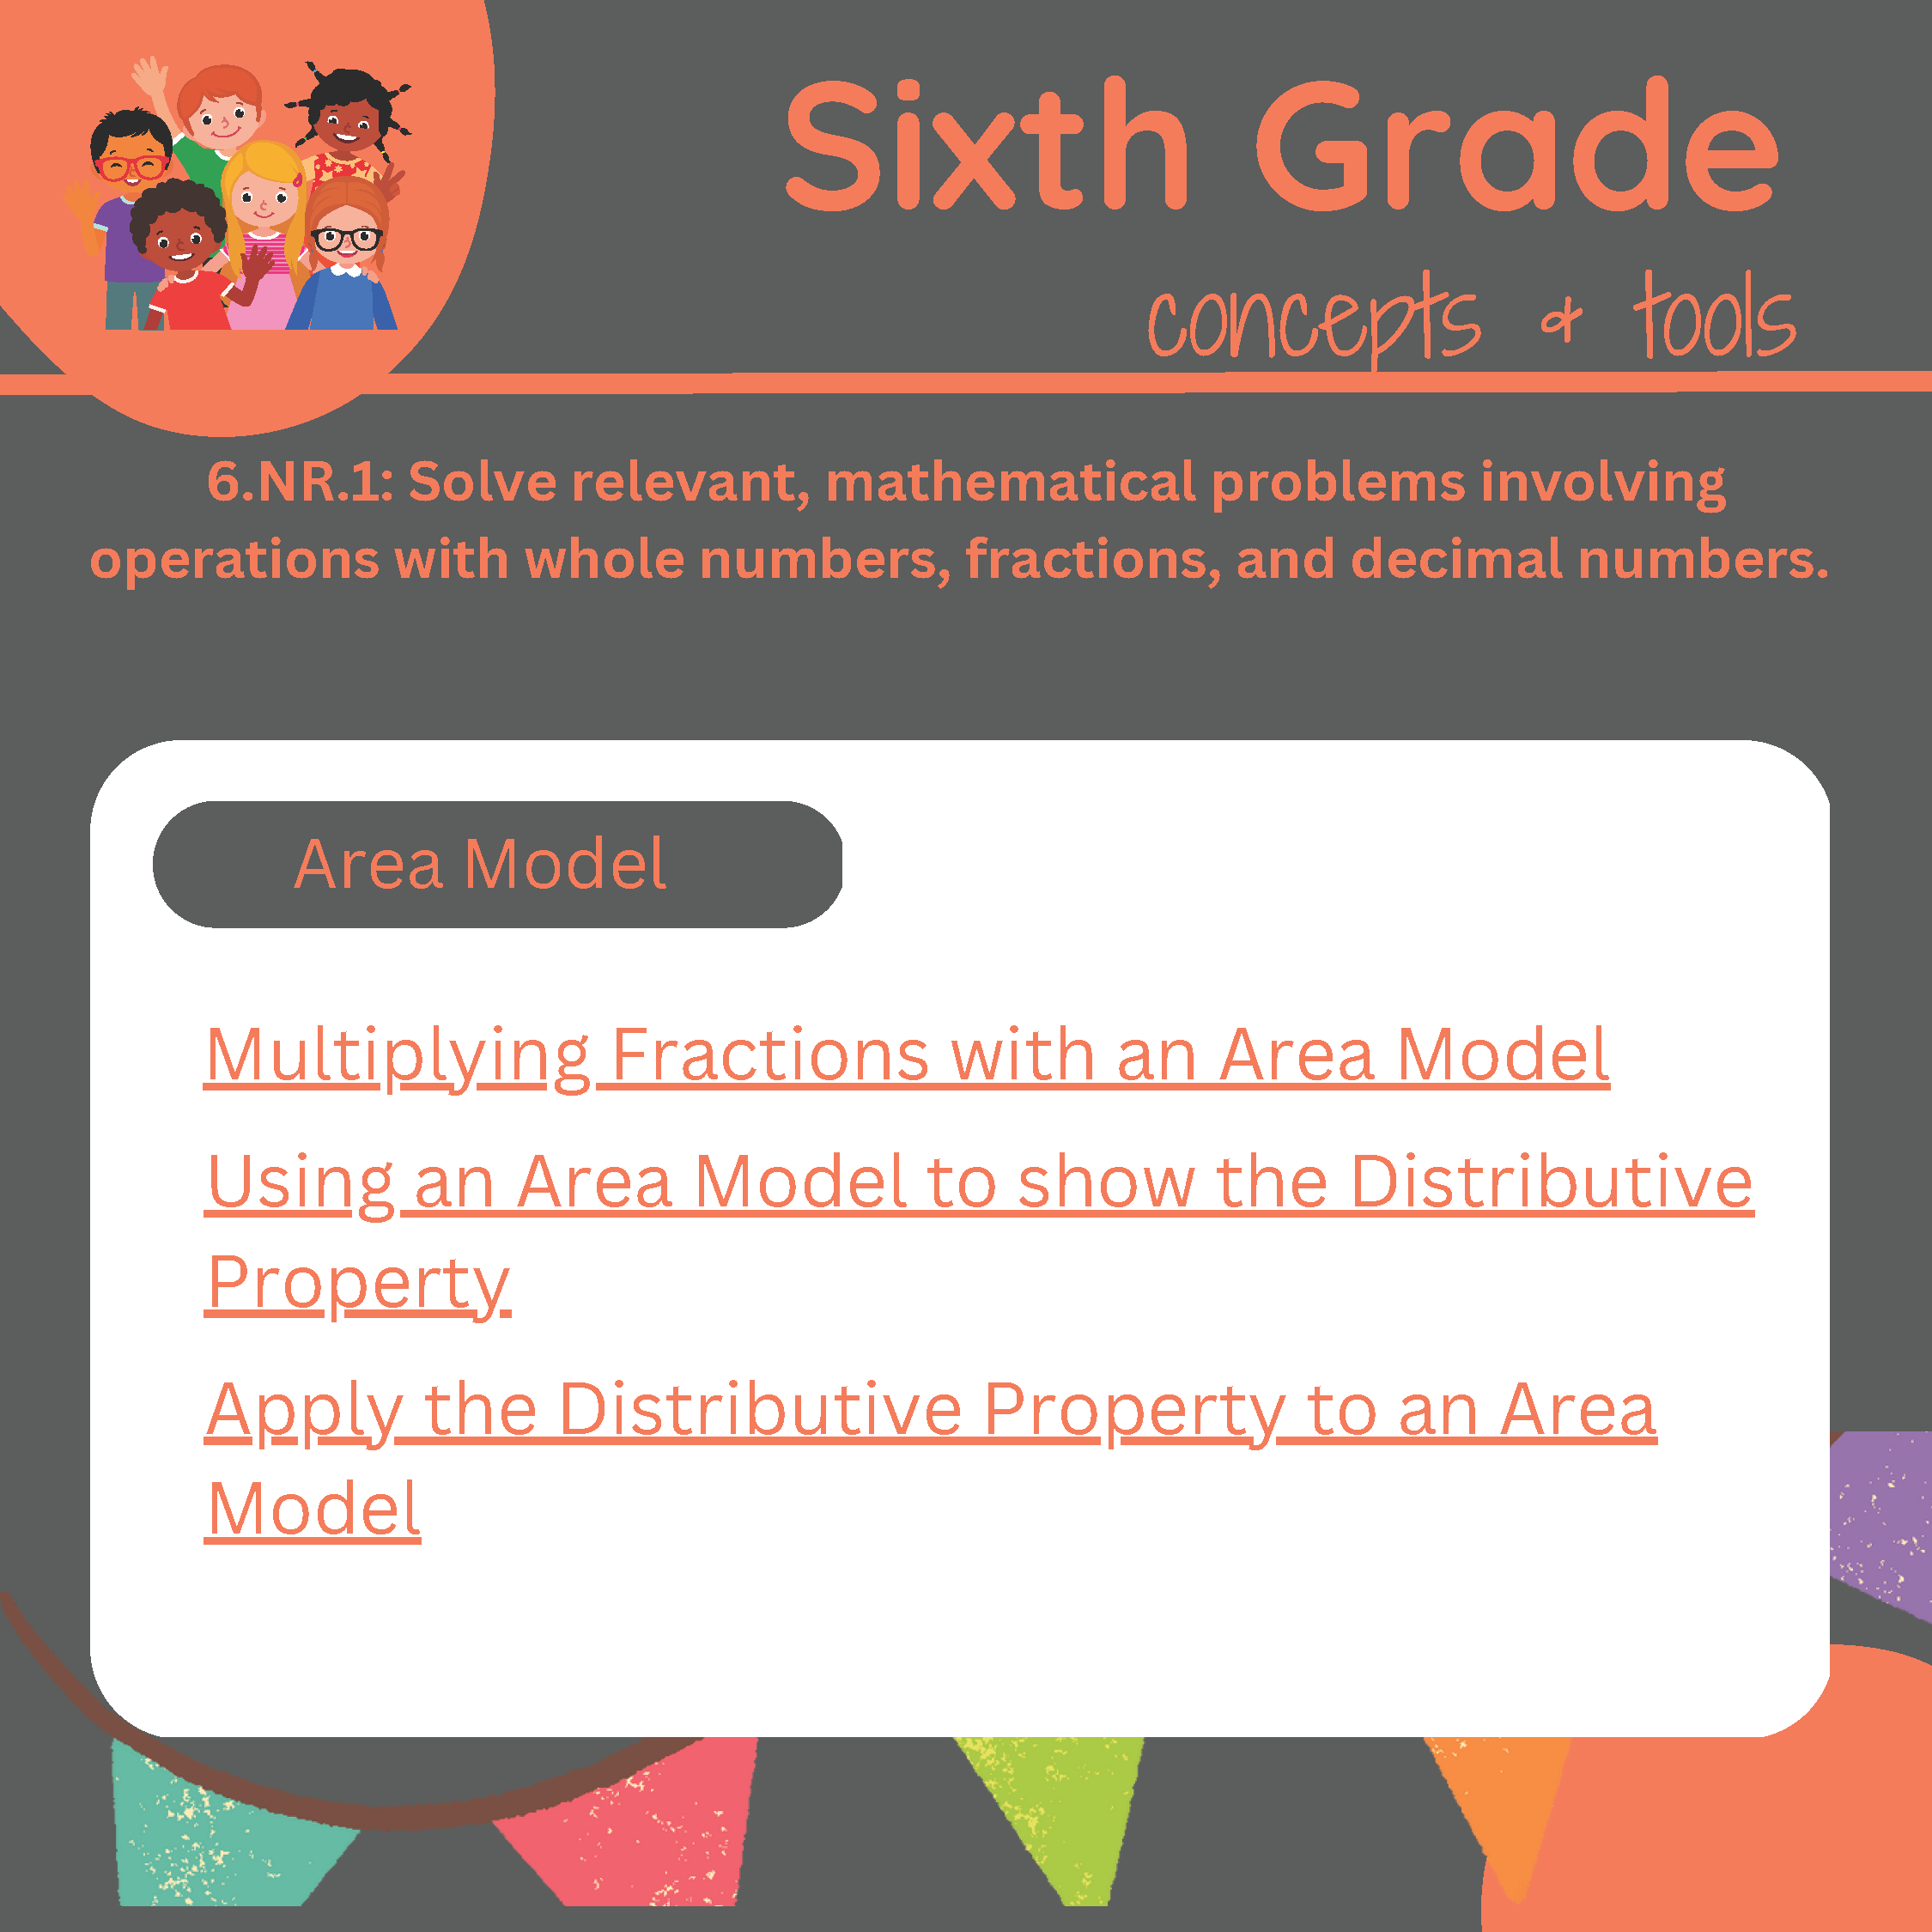 Sixth Grade concepts and tools_Page_1